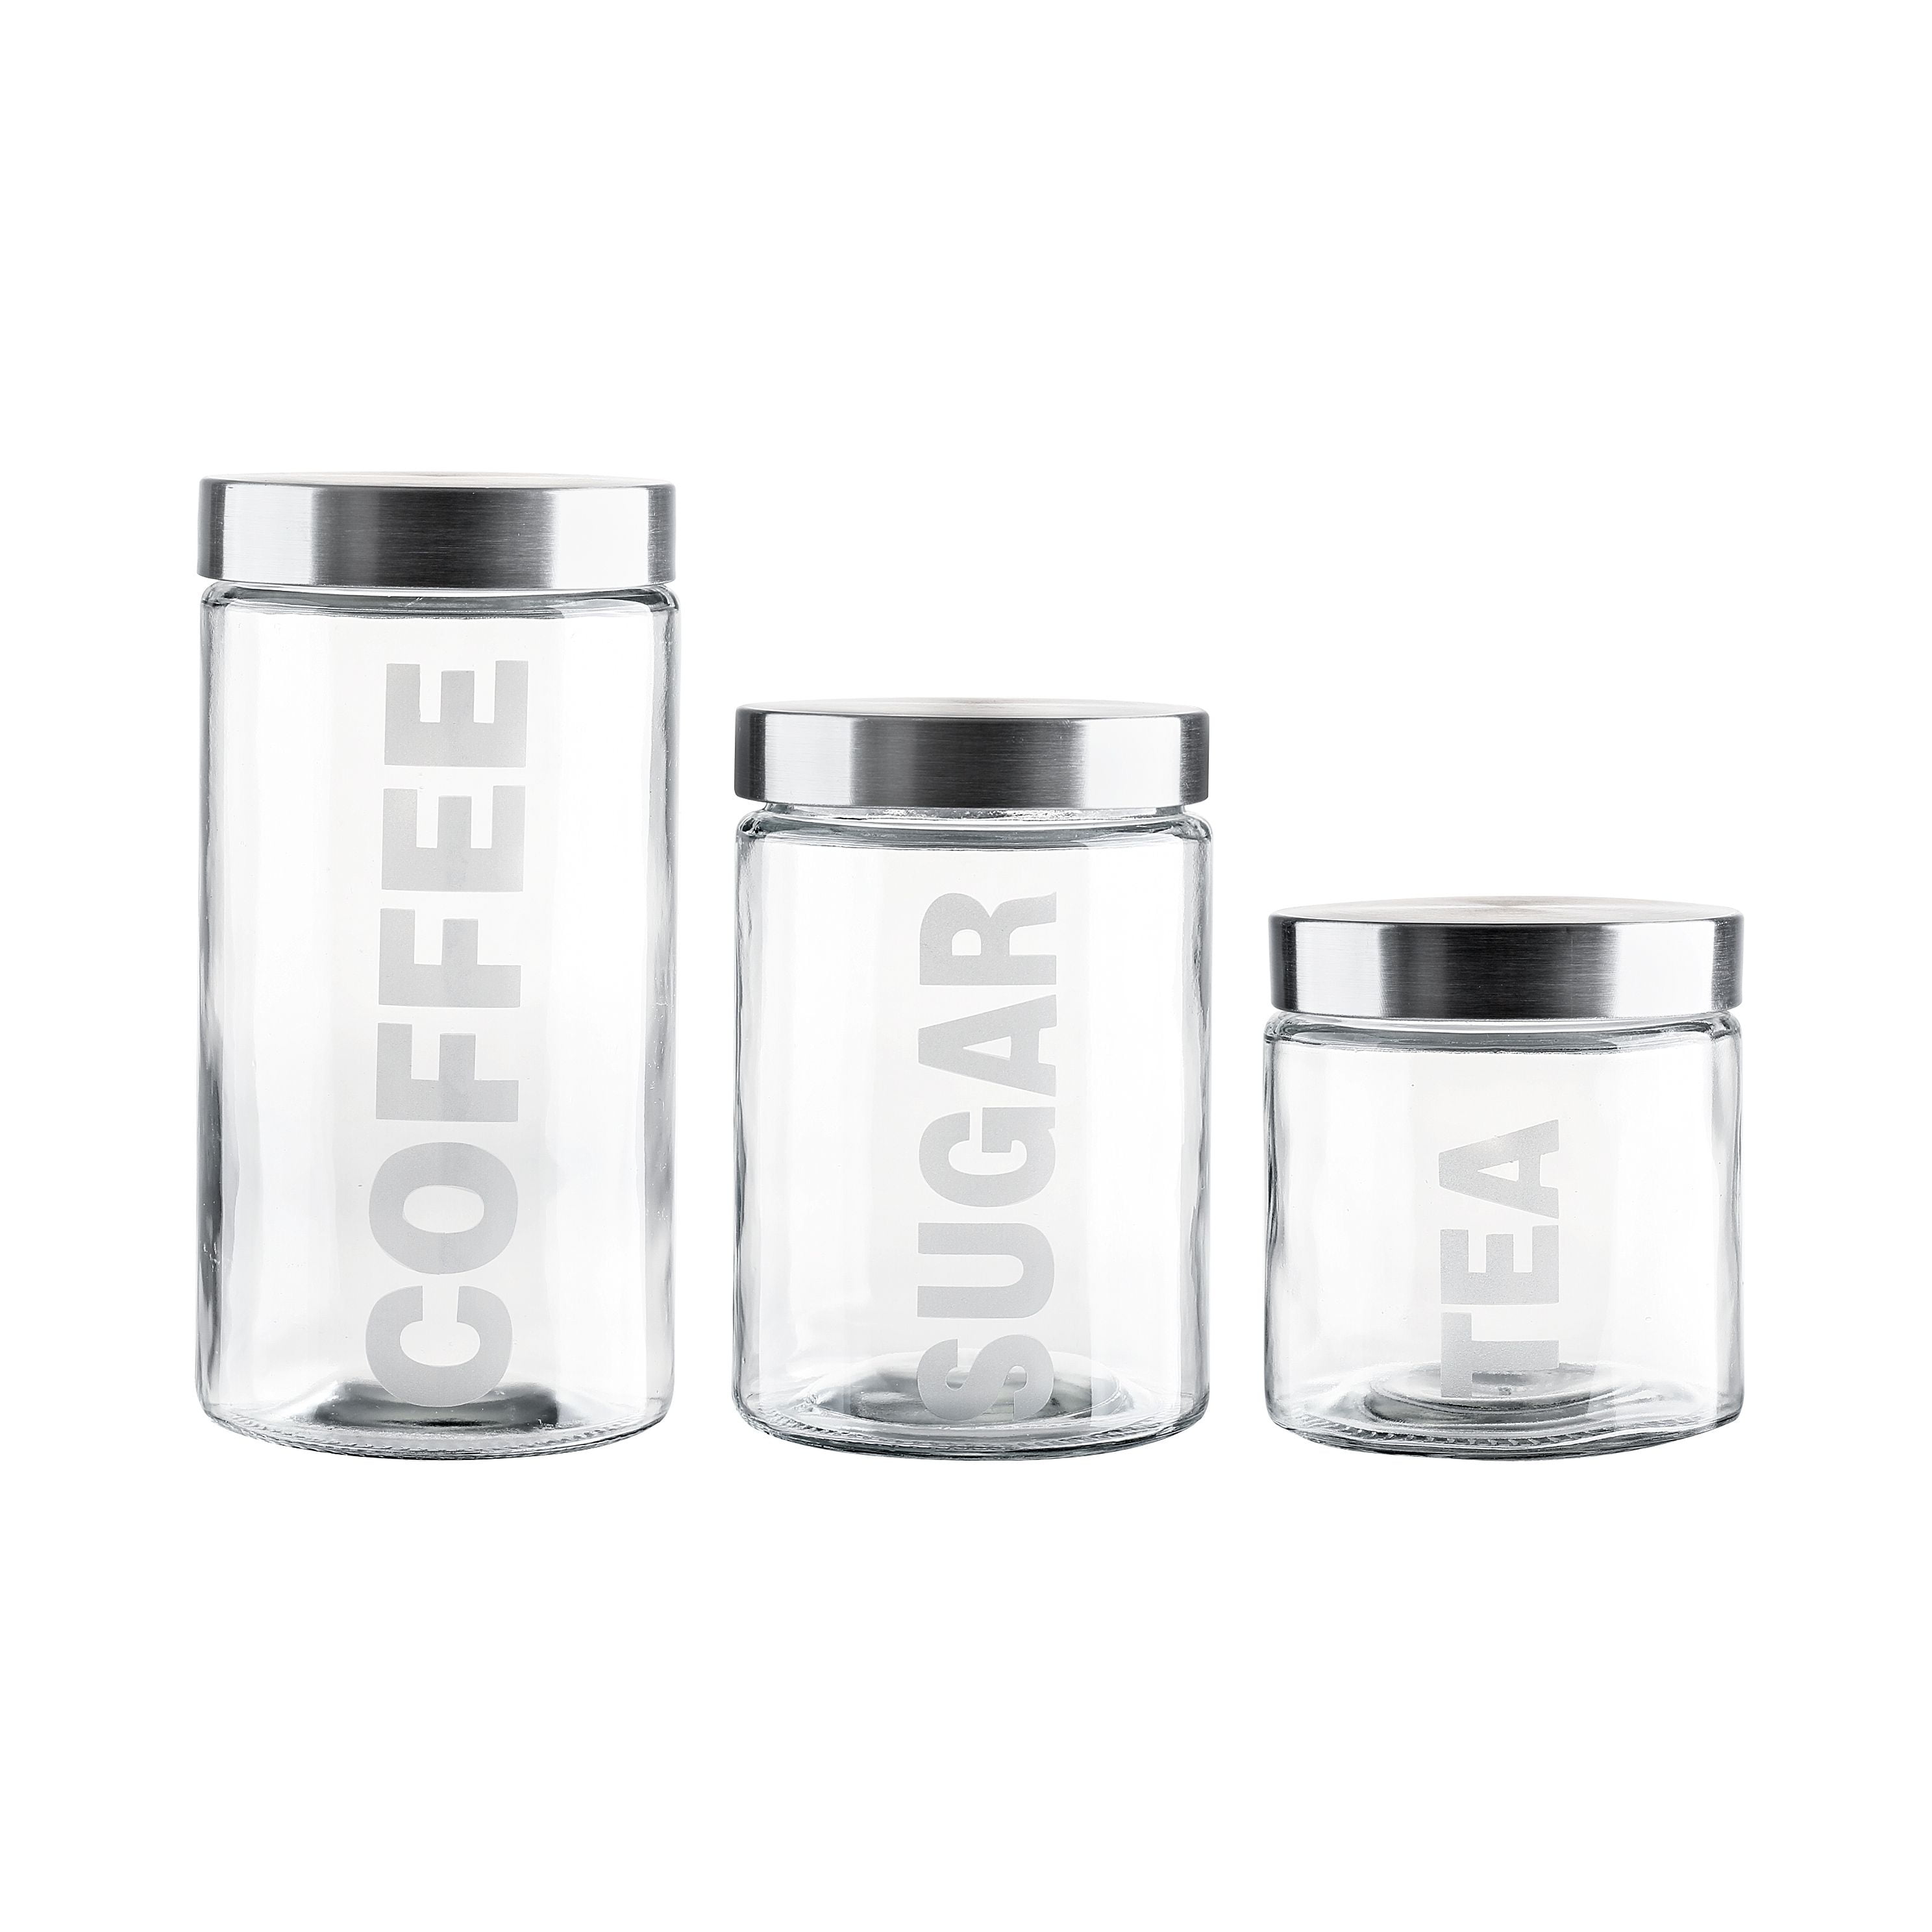 TRINITY Large Glass Canisters w/Bamboo Lid - Set of 3